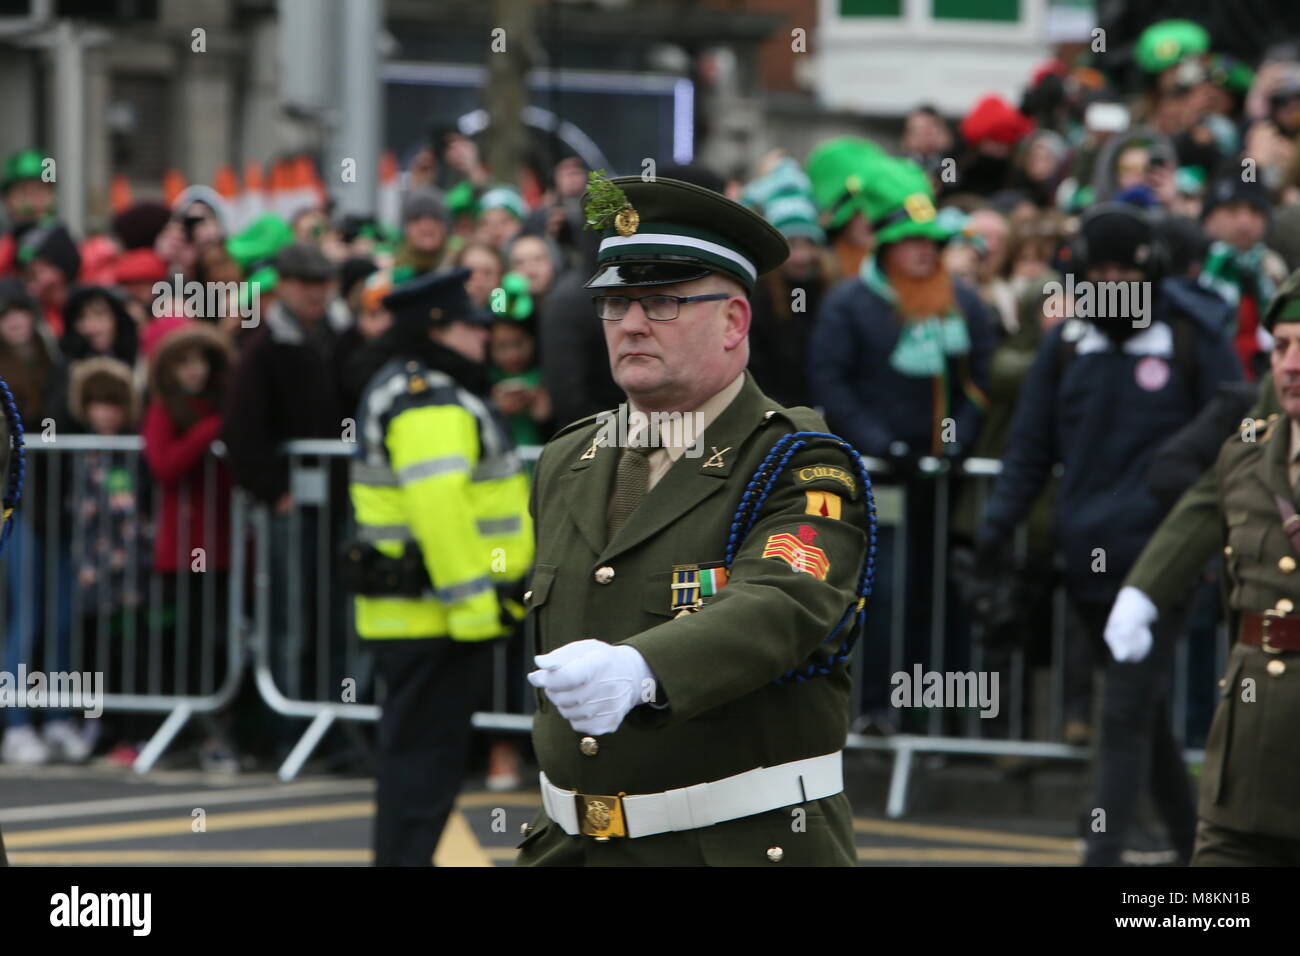 Irish Army Officers march on O'Connell Street. Image from Dublin city centre during the Saint Patrick's Day parade as part of the annual Saint Patrick Stock Photo